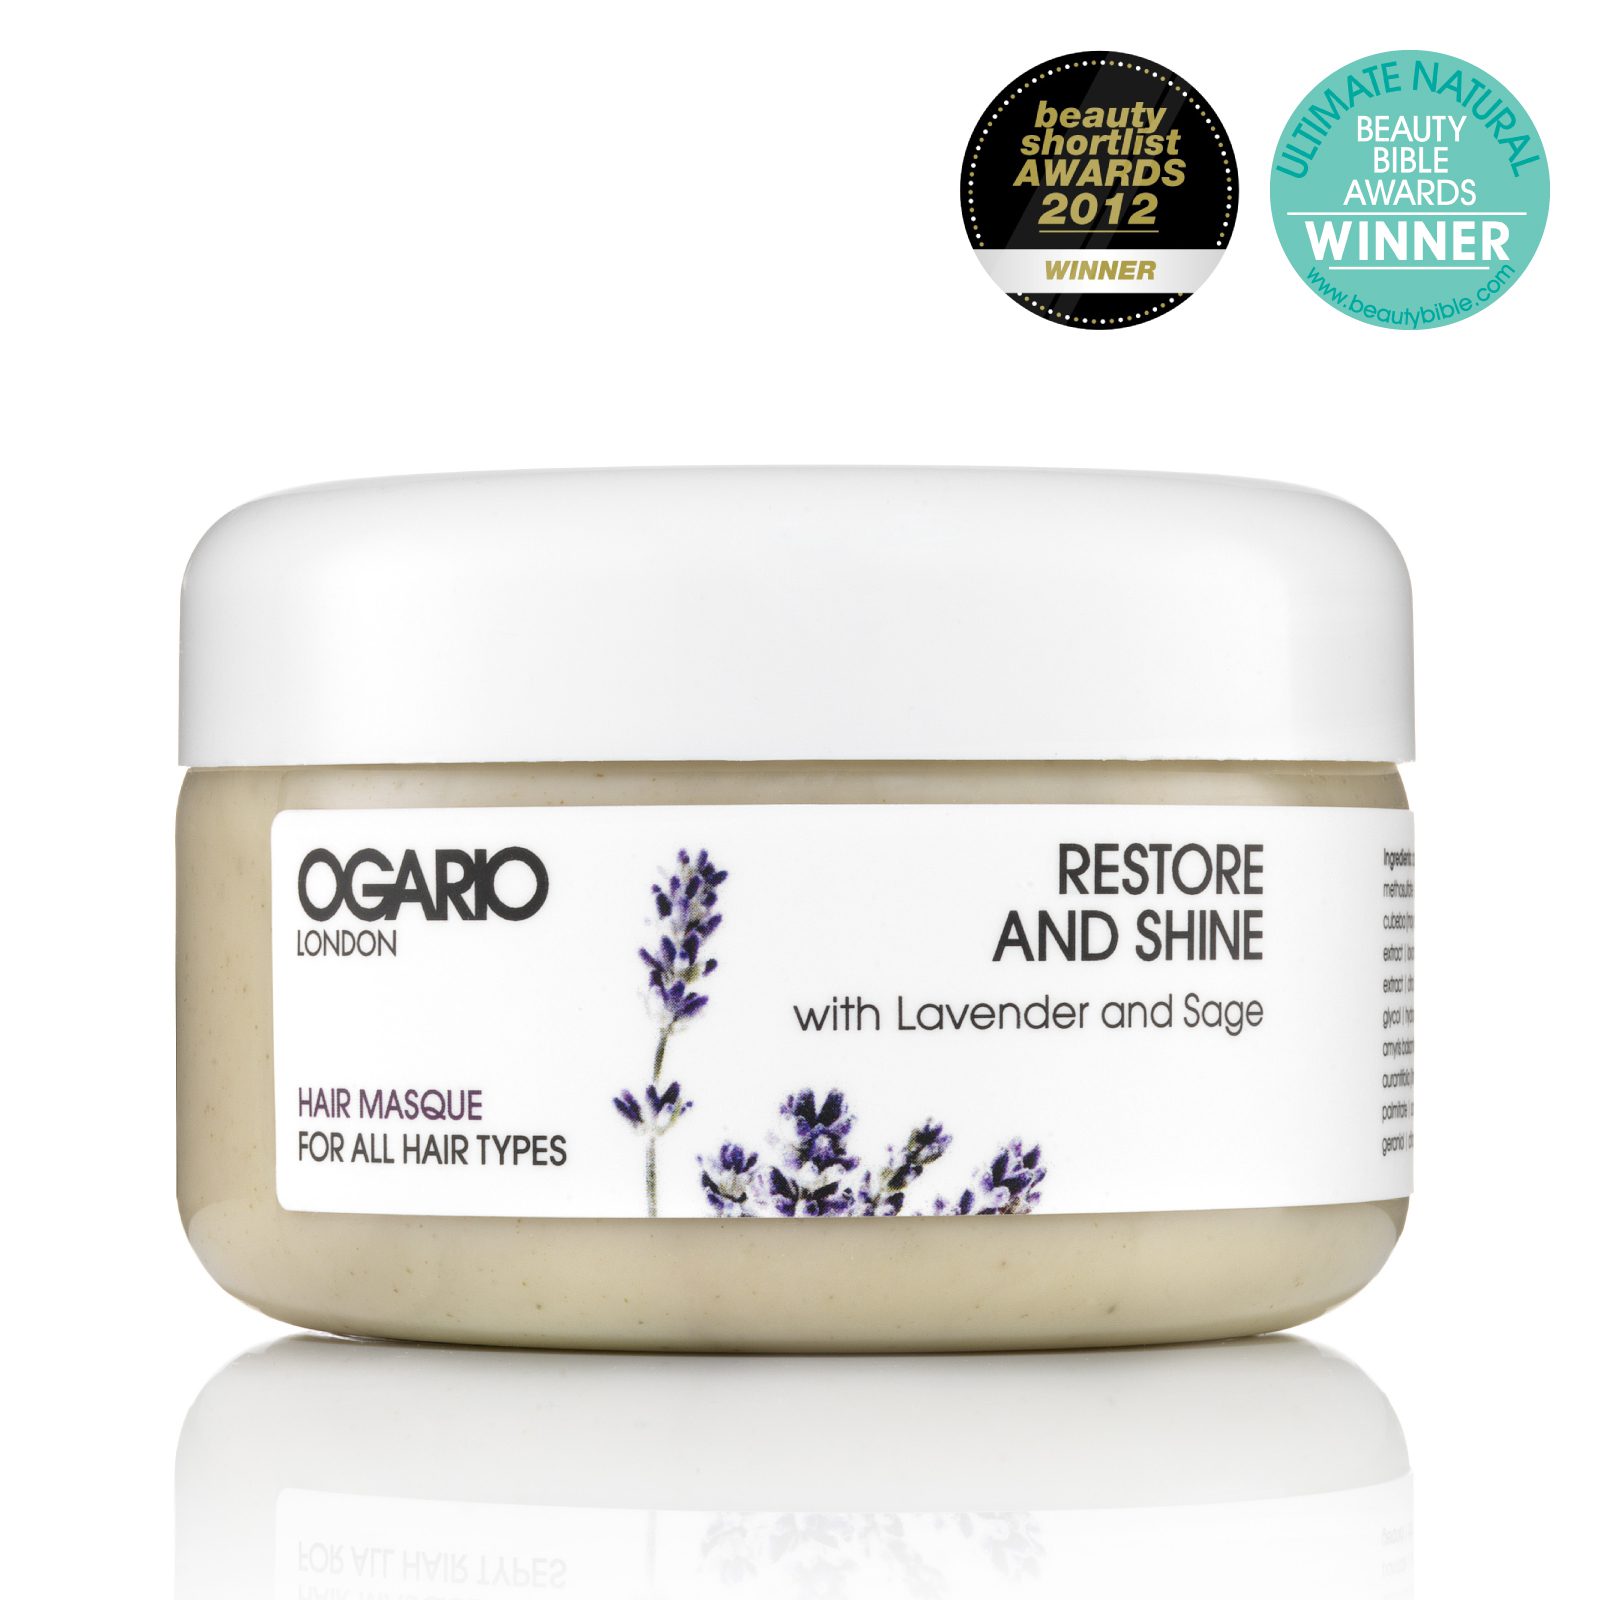 OGARIO Restore and Shine Hair Masque; Add moisture to all hair types